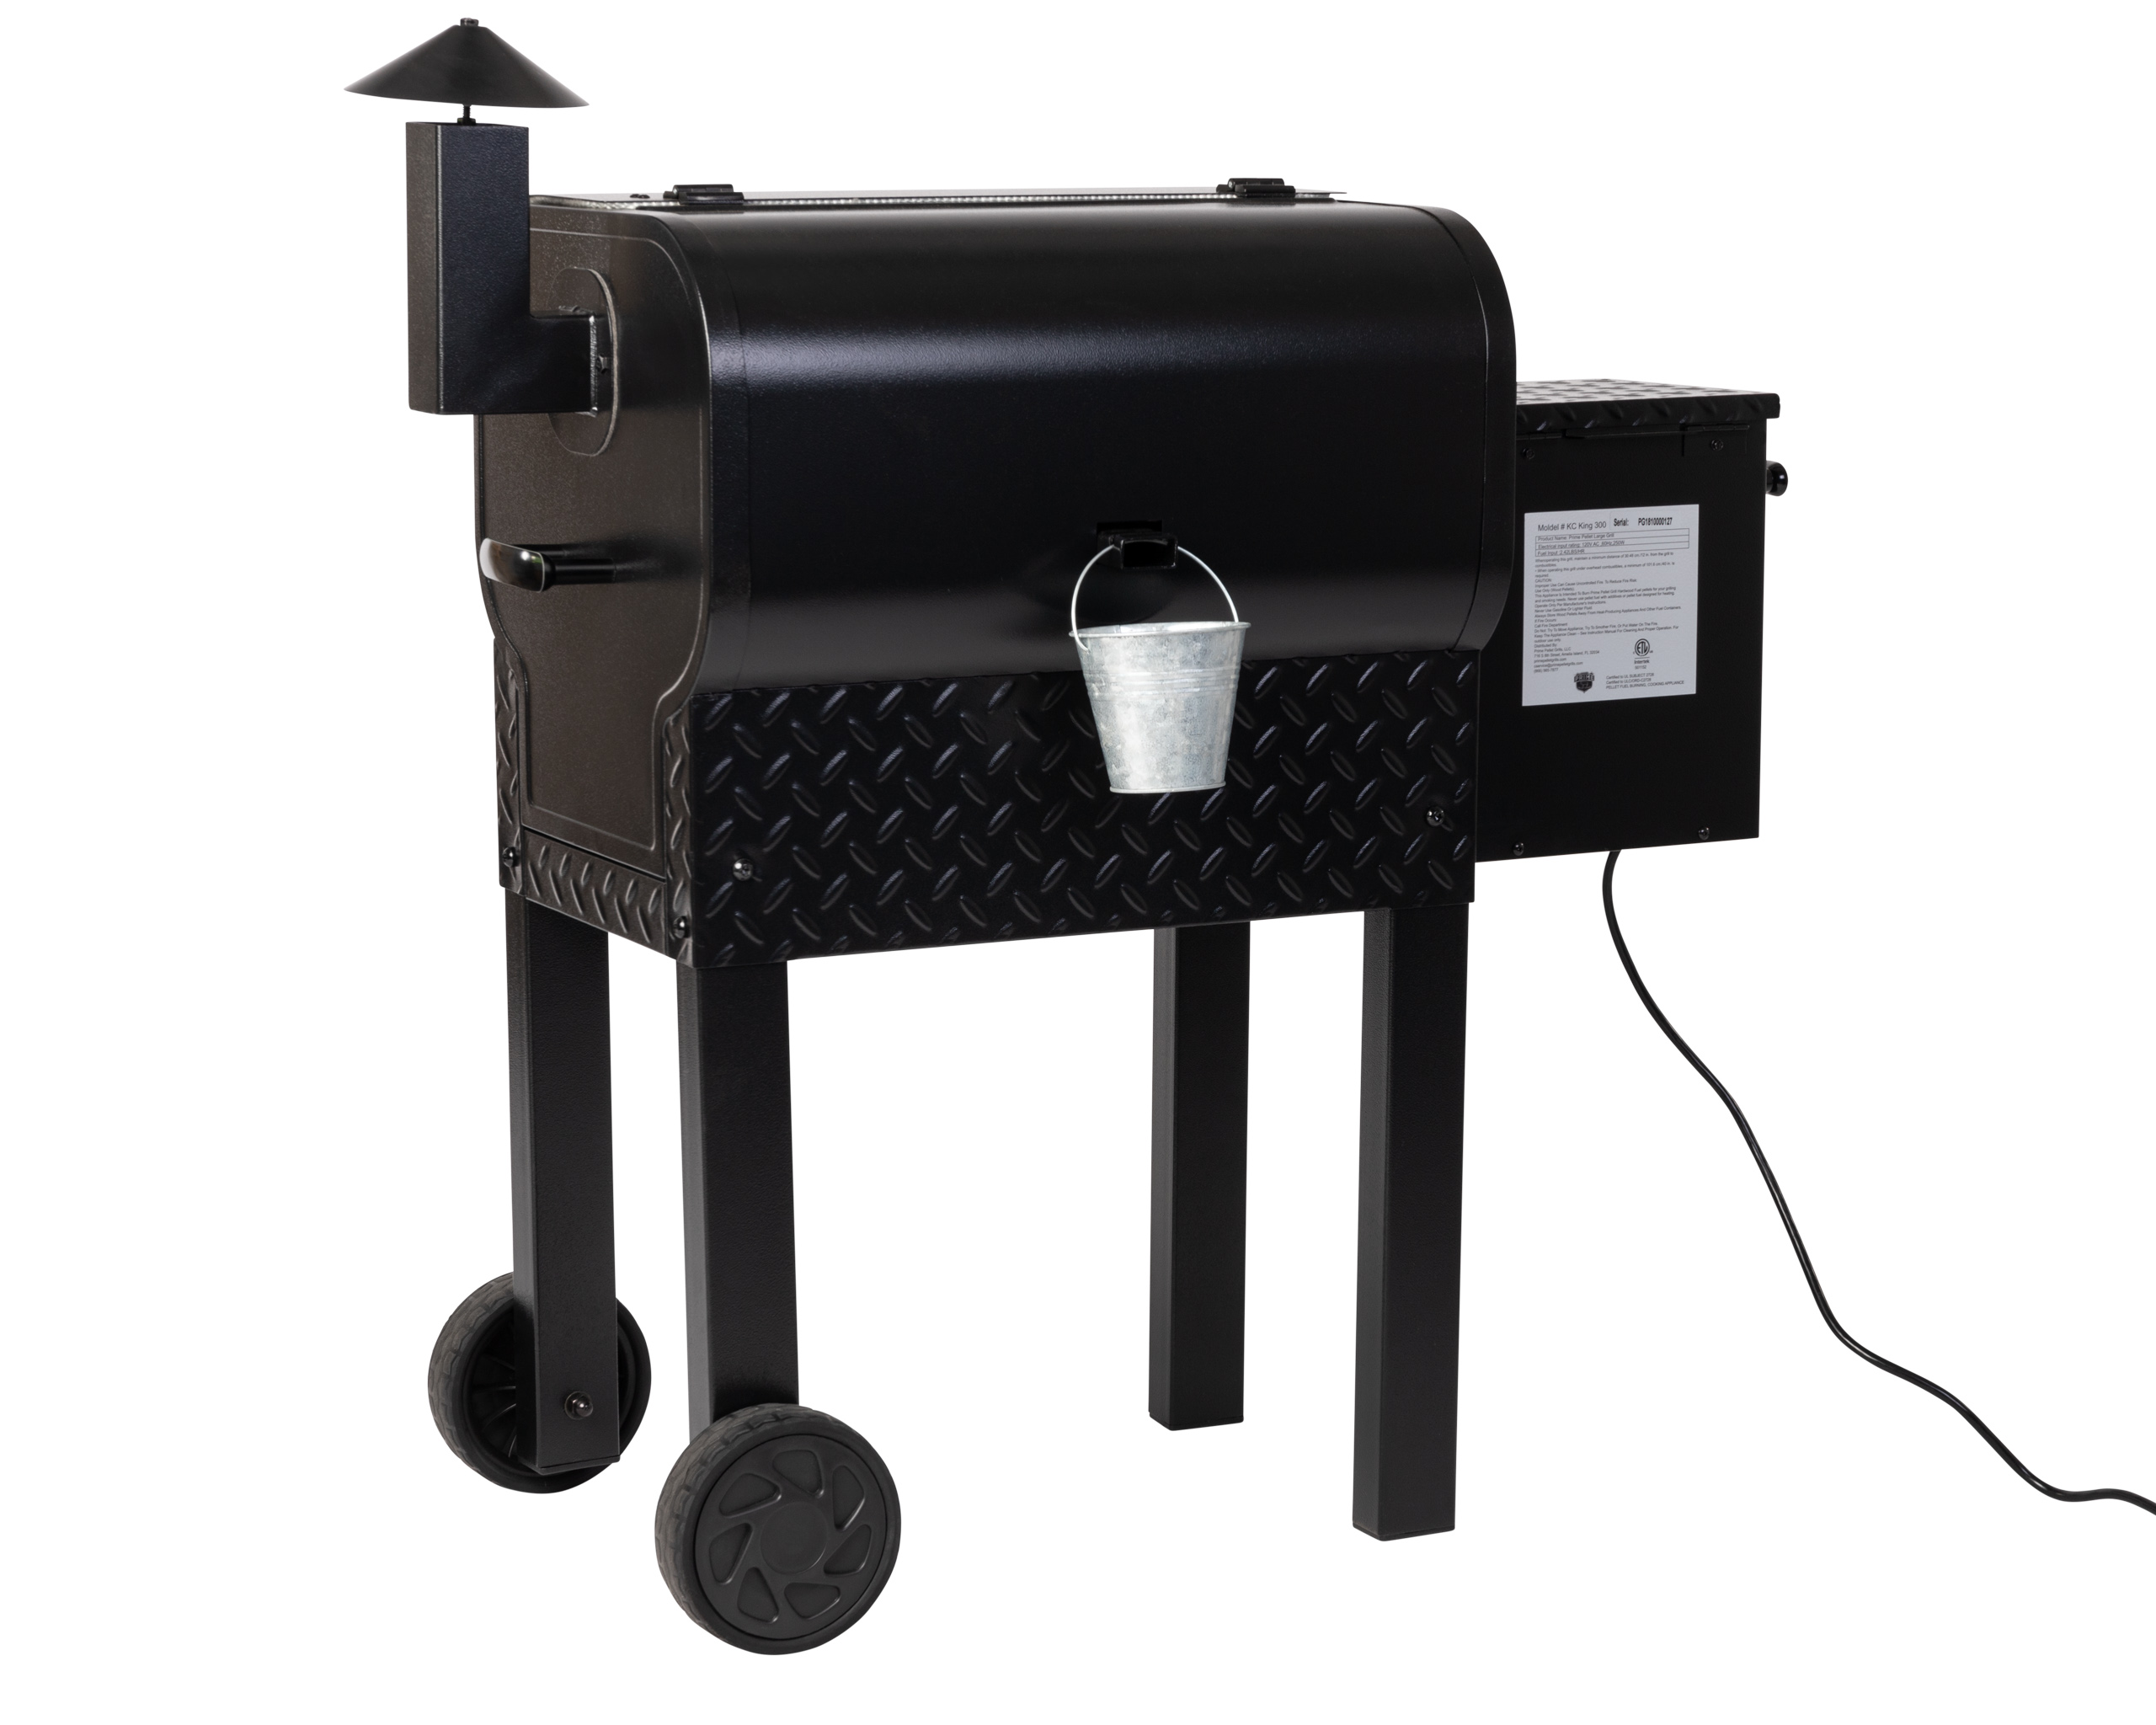  Prime Pellet Grill 81221 KC King 600 Square Inches Grilling  Area Electric Pellet Smoker Grill Convection Oven Slow Roaster Auto Pilot  With Digital Temprature Control & Hands Free Thermometers 